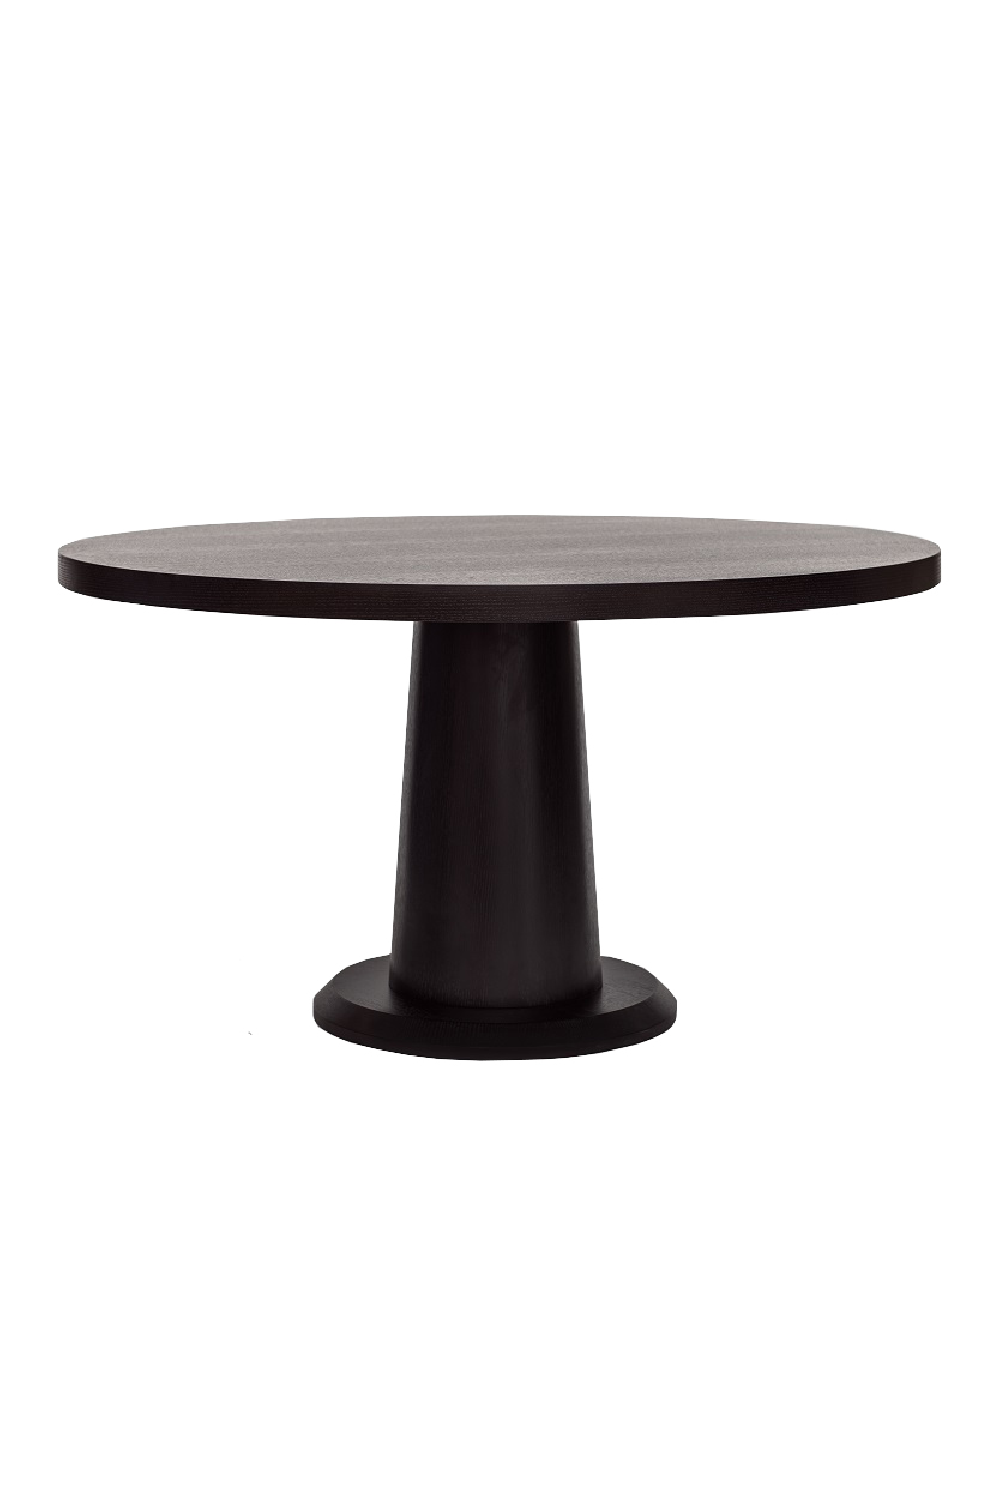 Wooden Pedestal Dining Table | Liang & Eimil Ancora | OROA.com